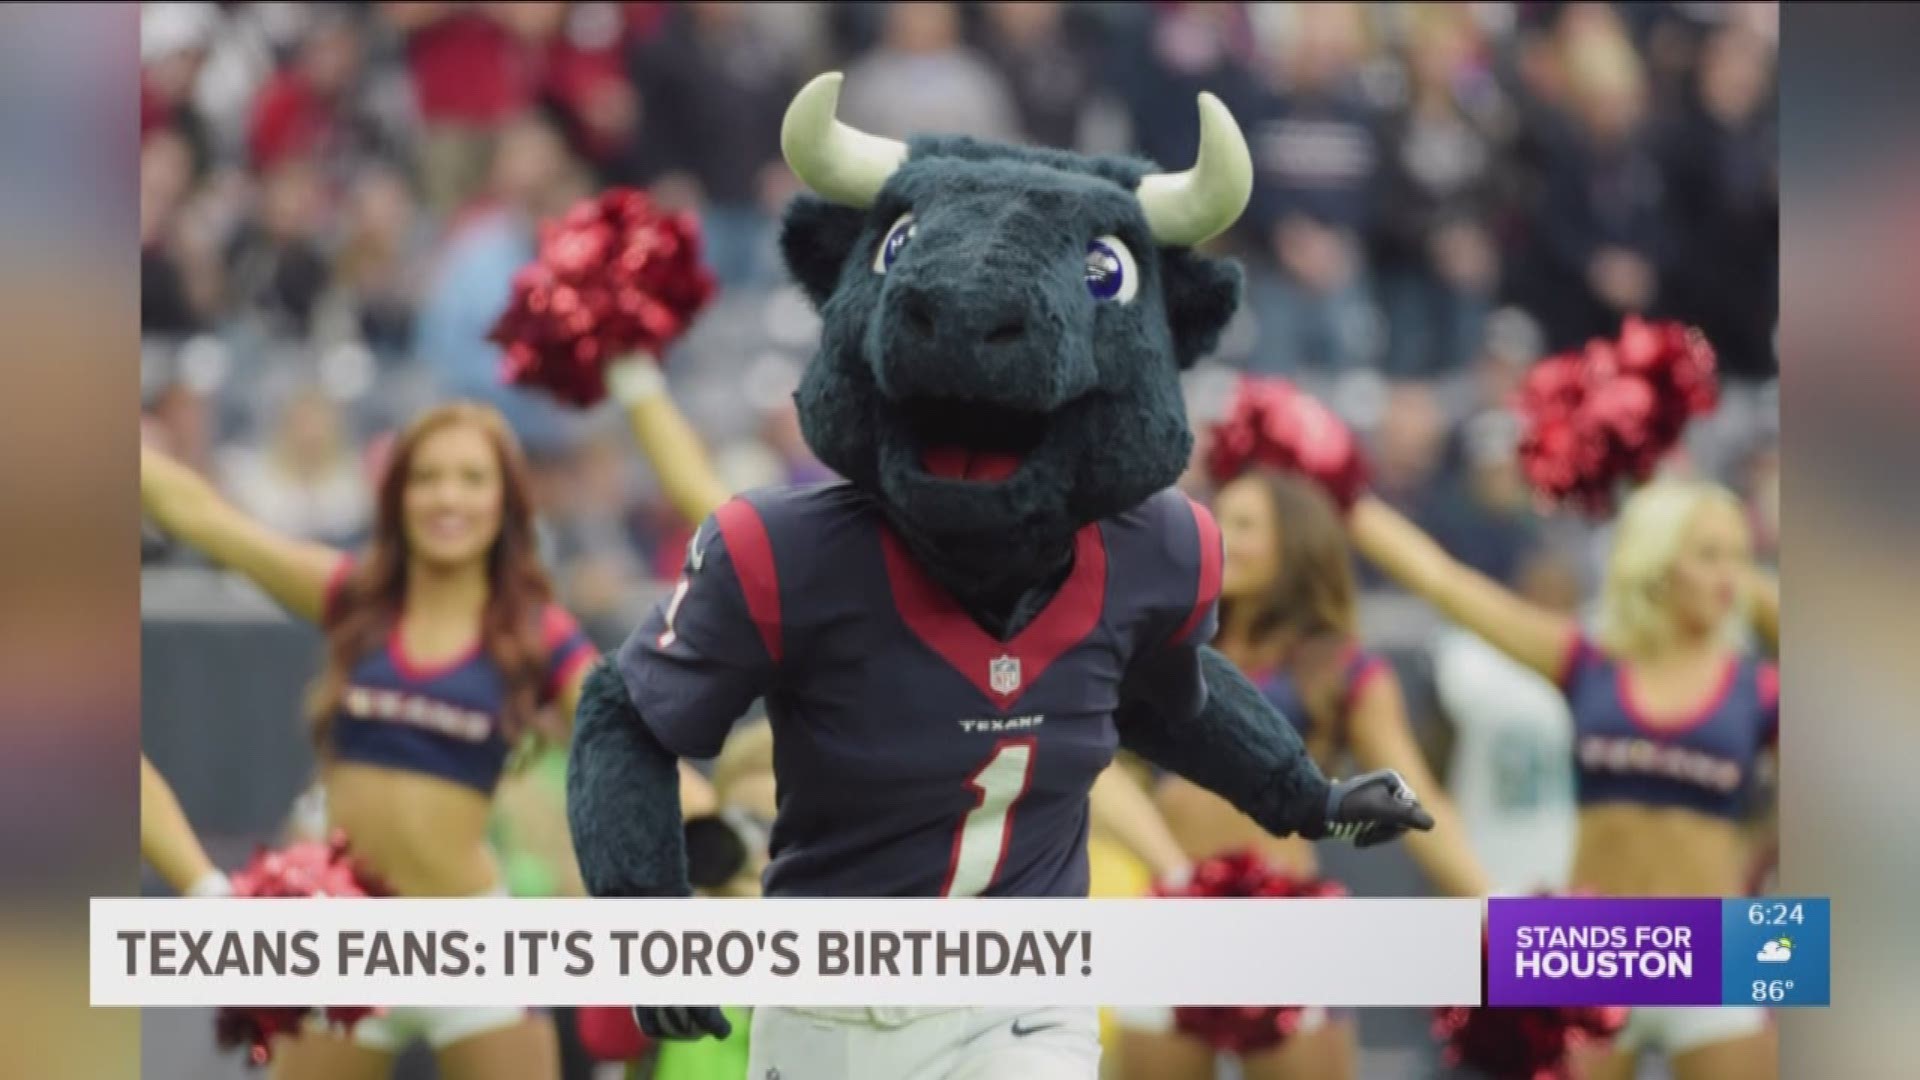 Texans fans have always loved their mascot Toro and Saturday is his birthday!